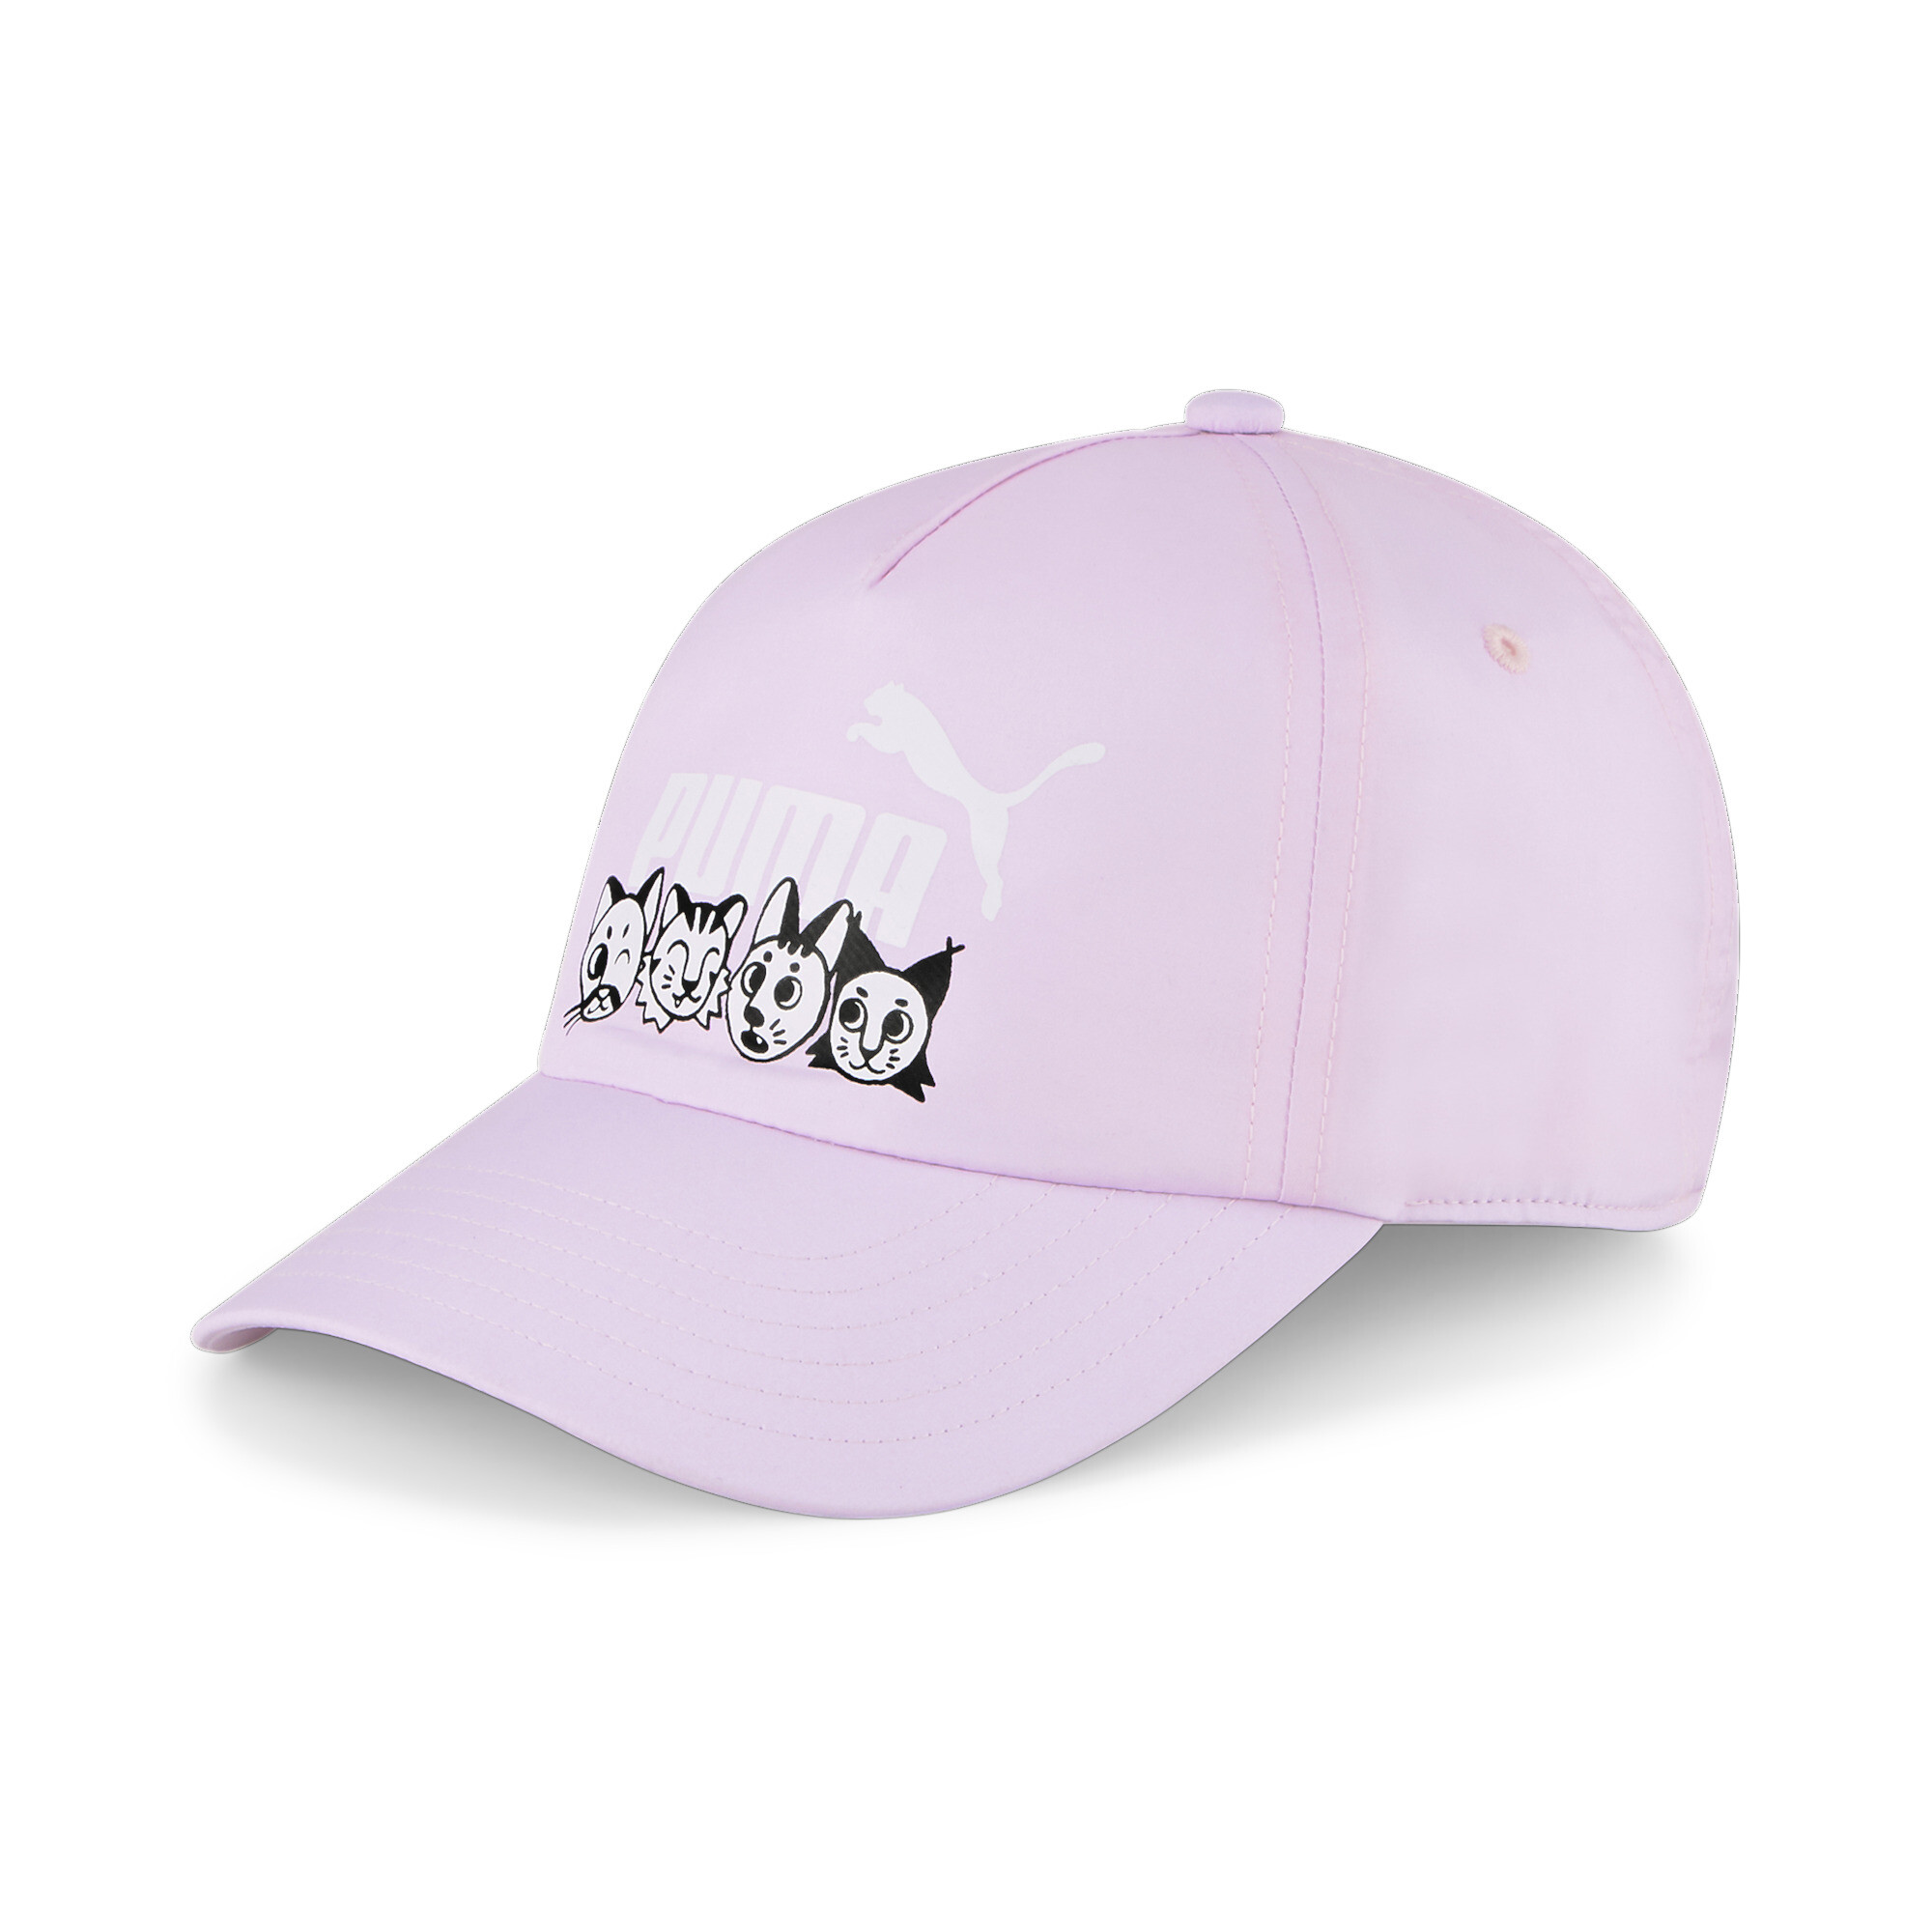 PUMA MATES Cap In Pink, Size Youth